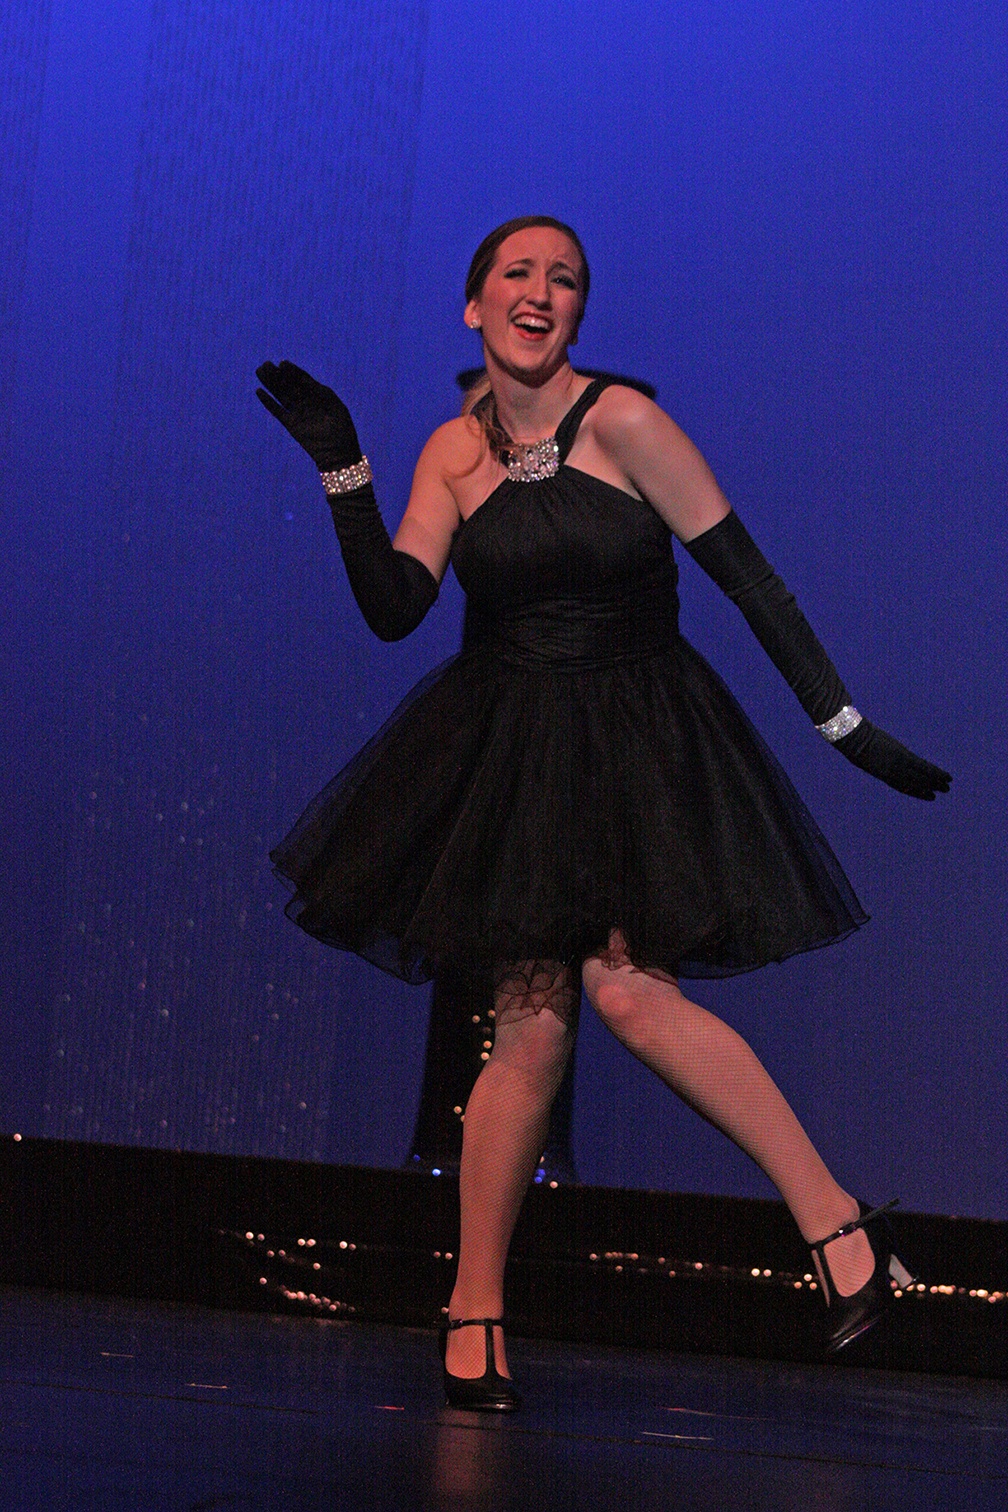 Alexis Florence, first runner-up, tap dances to ”Diamonds Are A Girl’s Best Friend”, as sung by Marilyn Monroe. MARK KLAAS, Reporter